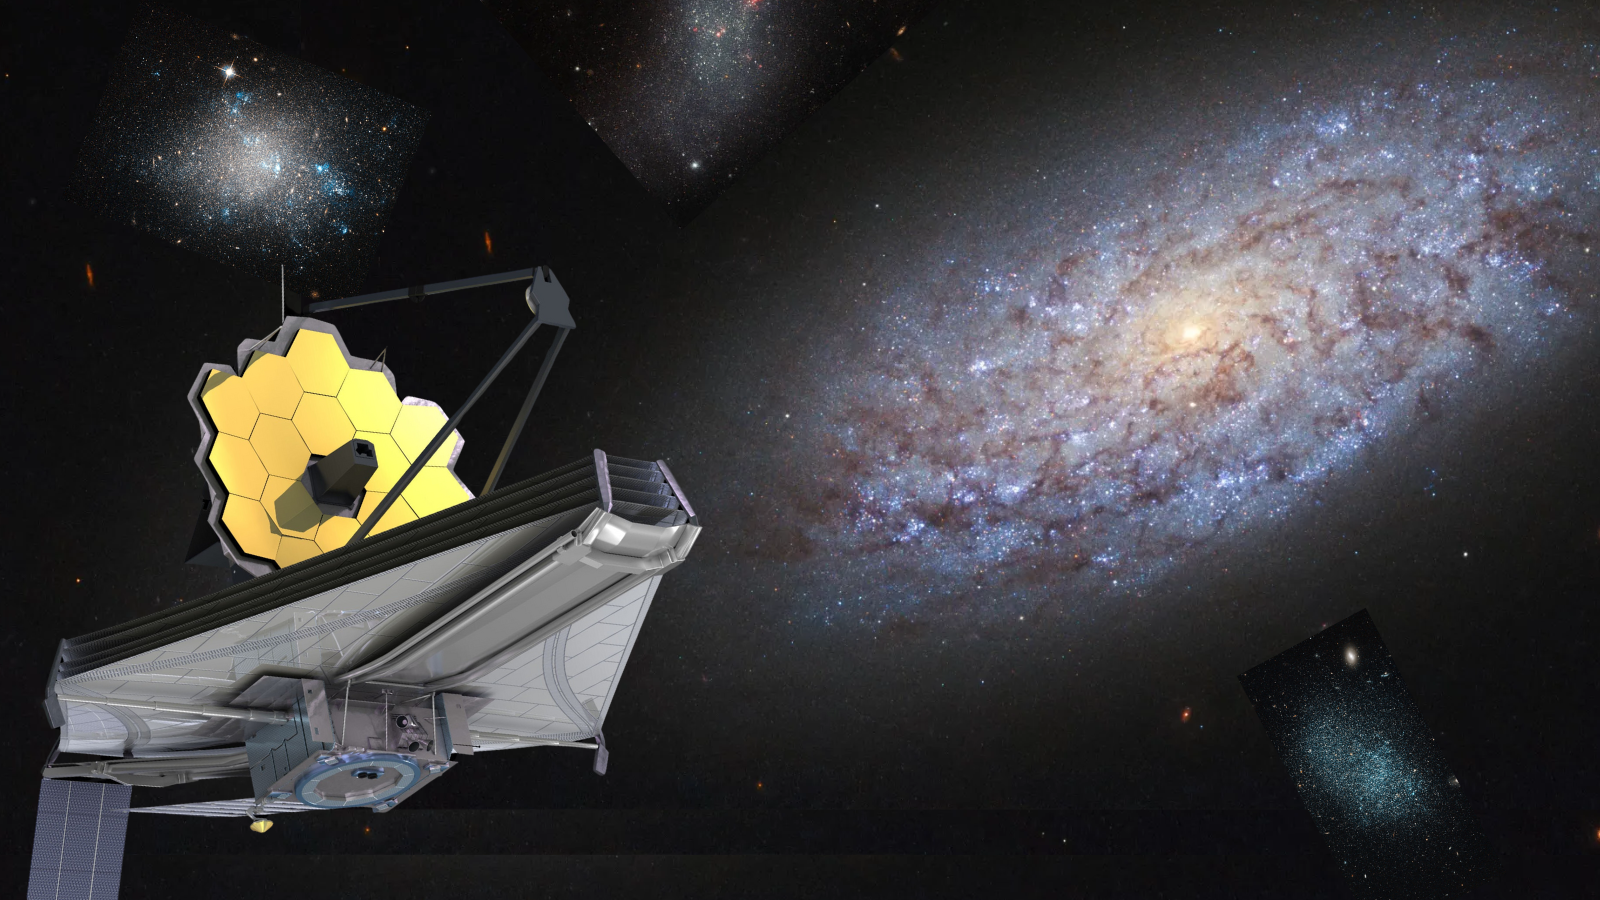 James Webb Space Telescope finds dwarf galaxies packed enough punch to reshape the entire early universe Space